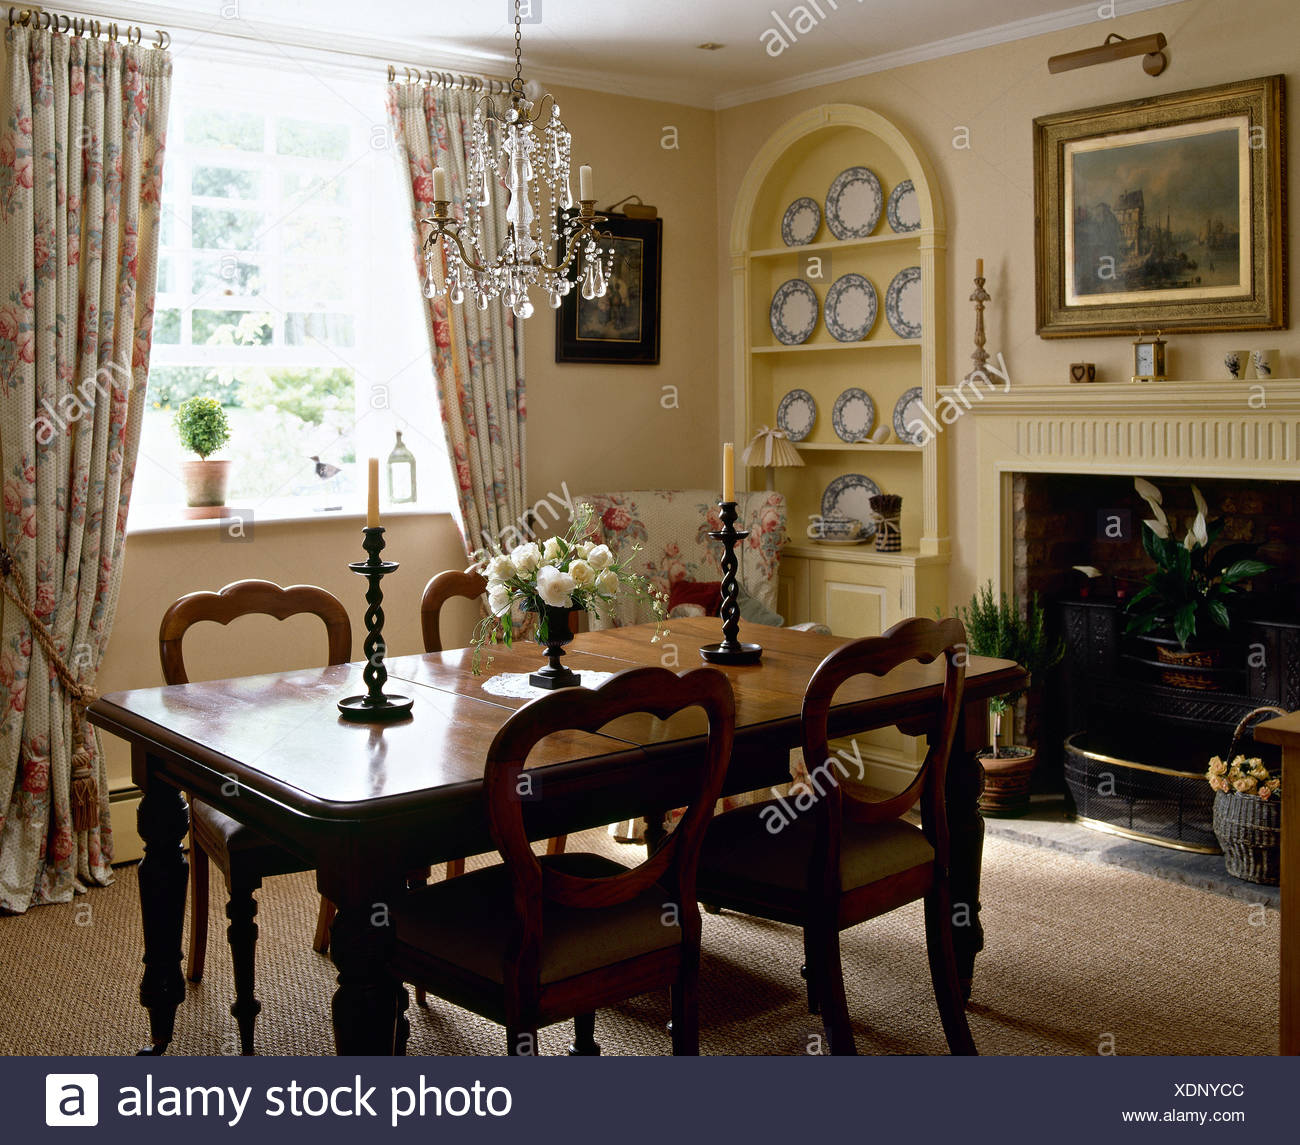 Antique table and balloon back chairs in traditional living room with  alcove shelving and floral curtains Stock Photo - Alamy